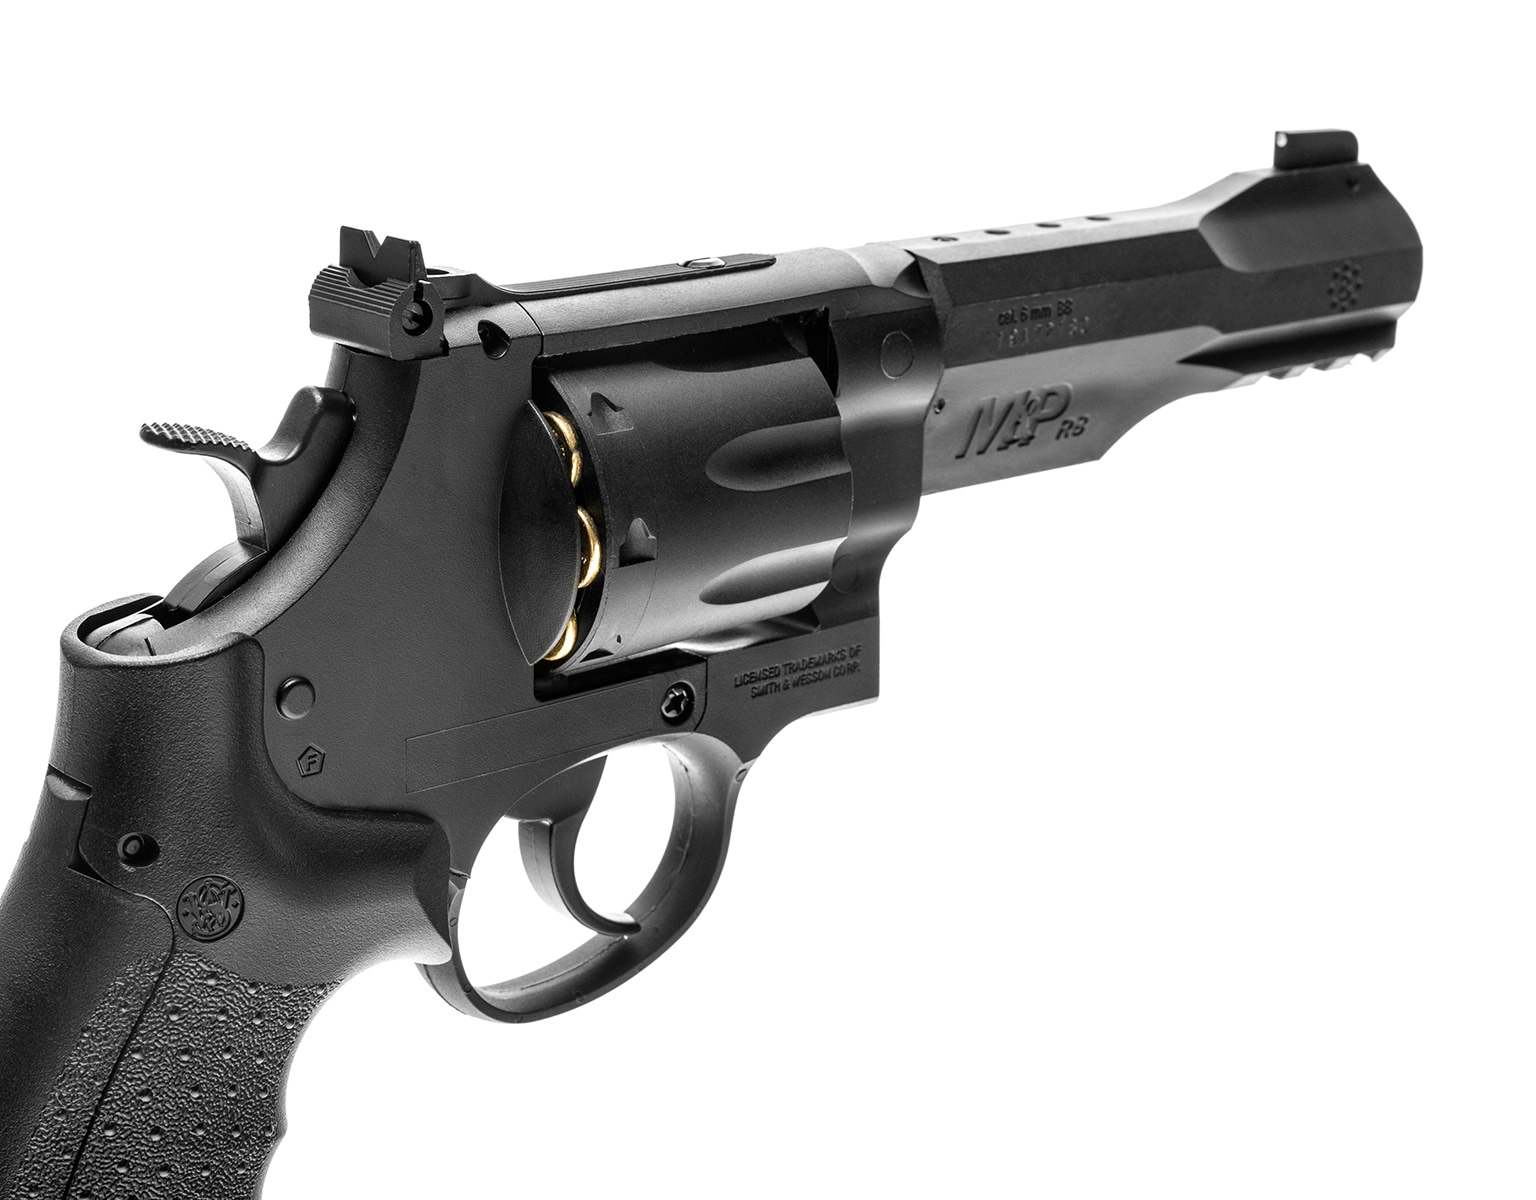 Rewolwer GNB Smith&Wesson M&P R8